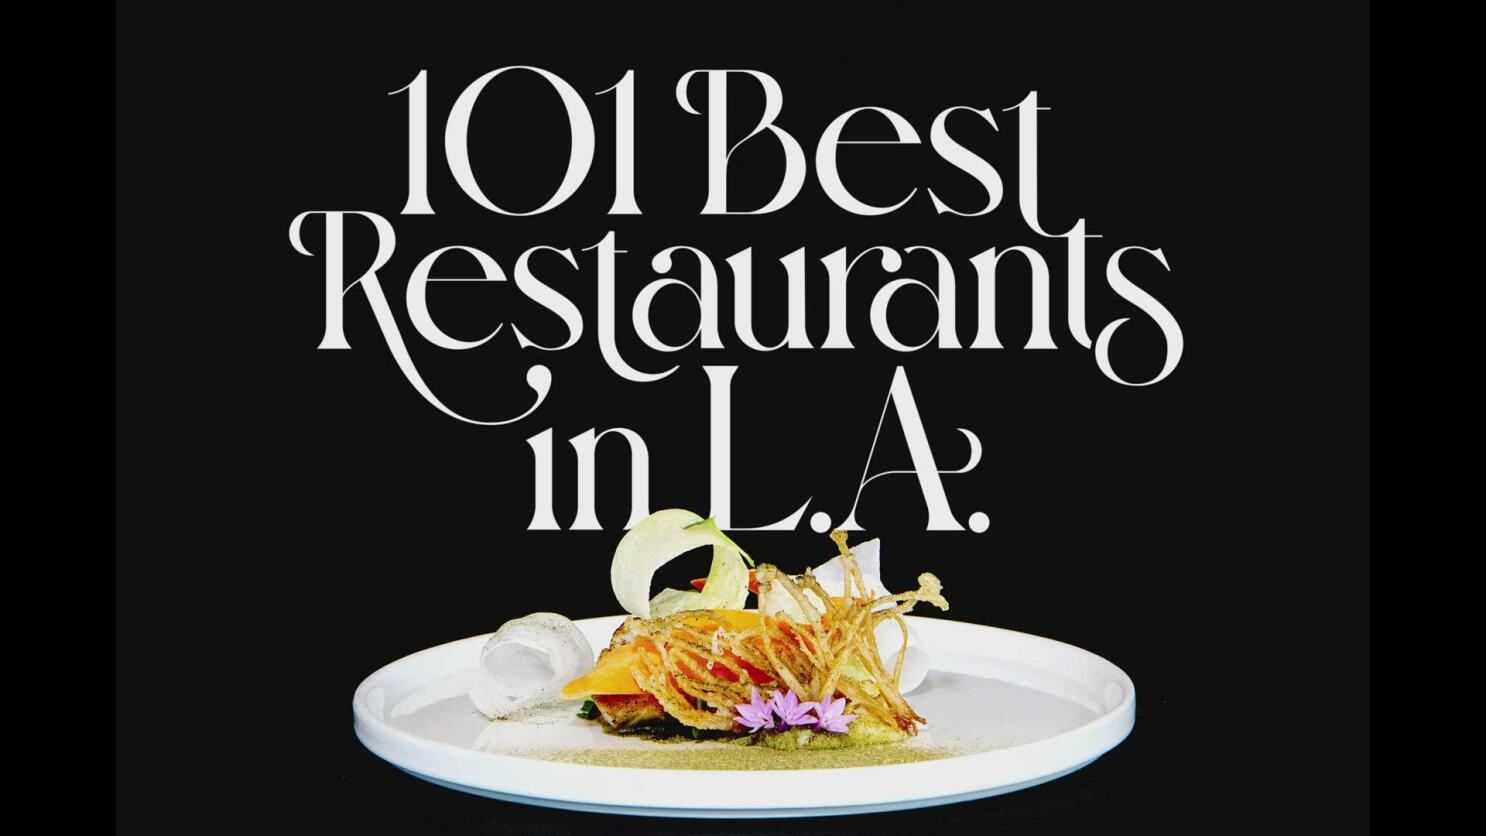 These are the 101 best restaurants in L.A. - Los Angeles Times